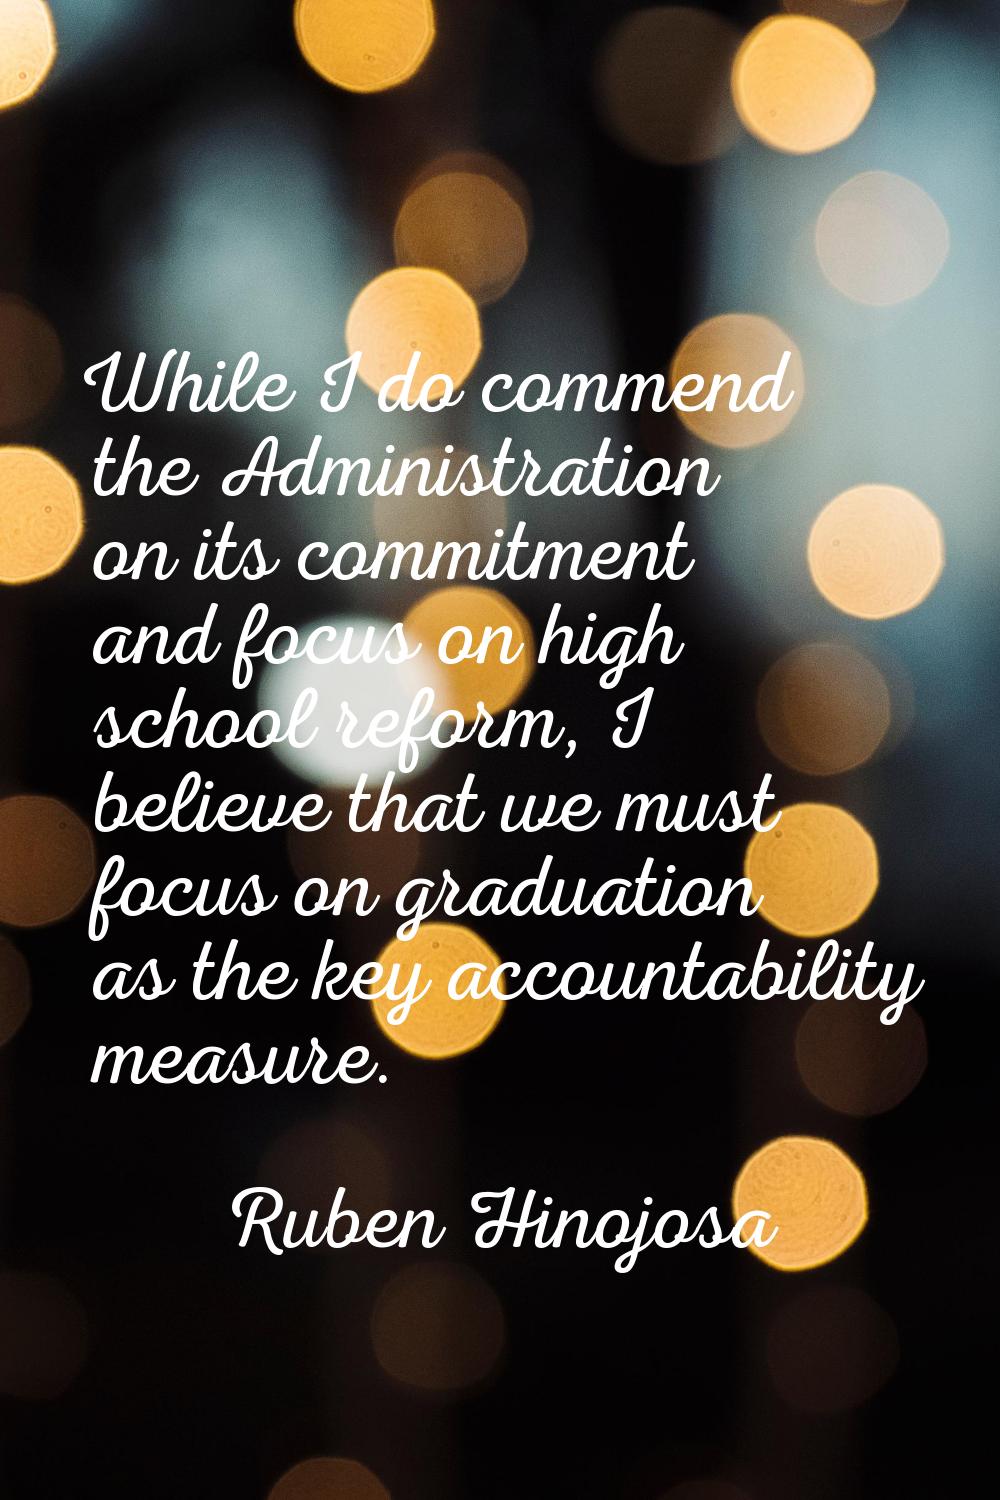 While I do commend the Administration on its commitment and focus on high school reform, I believe 